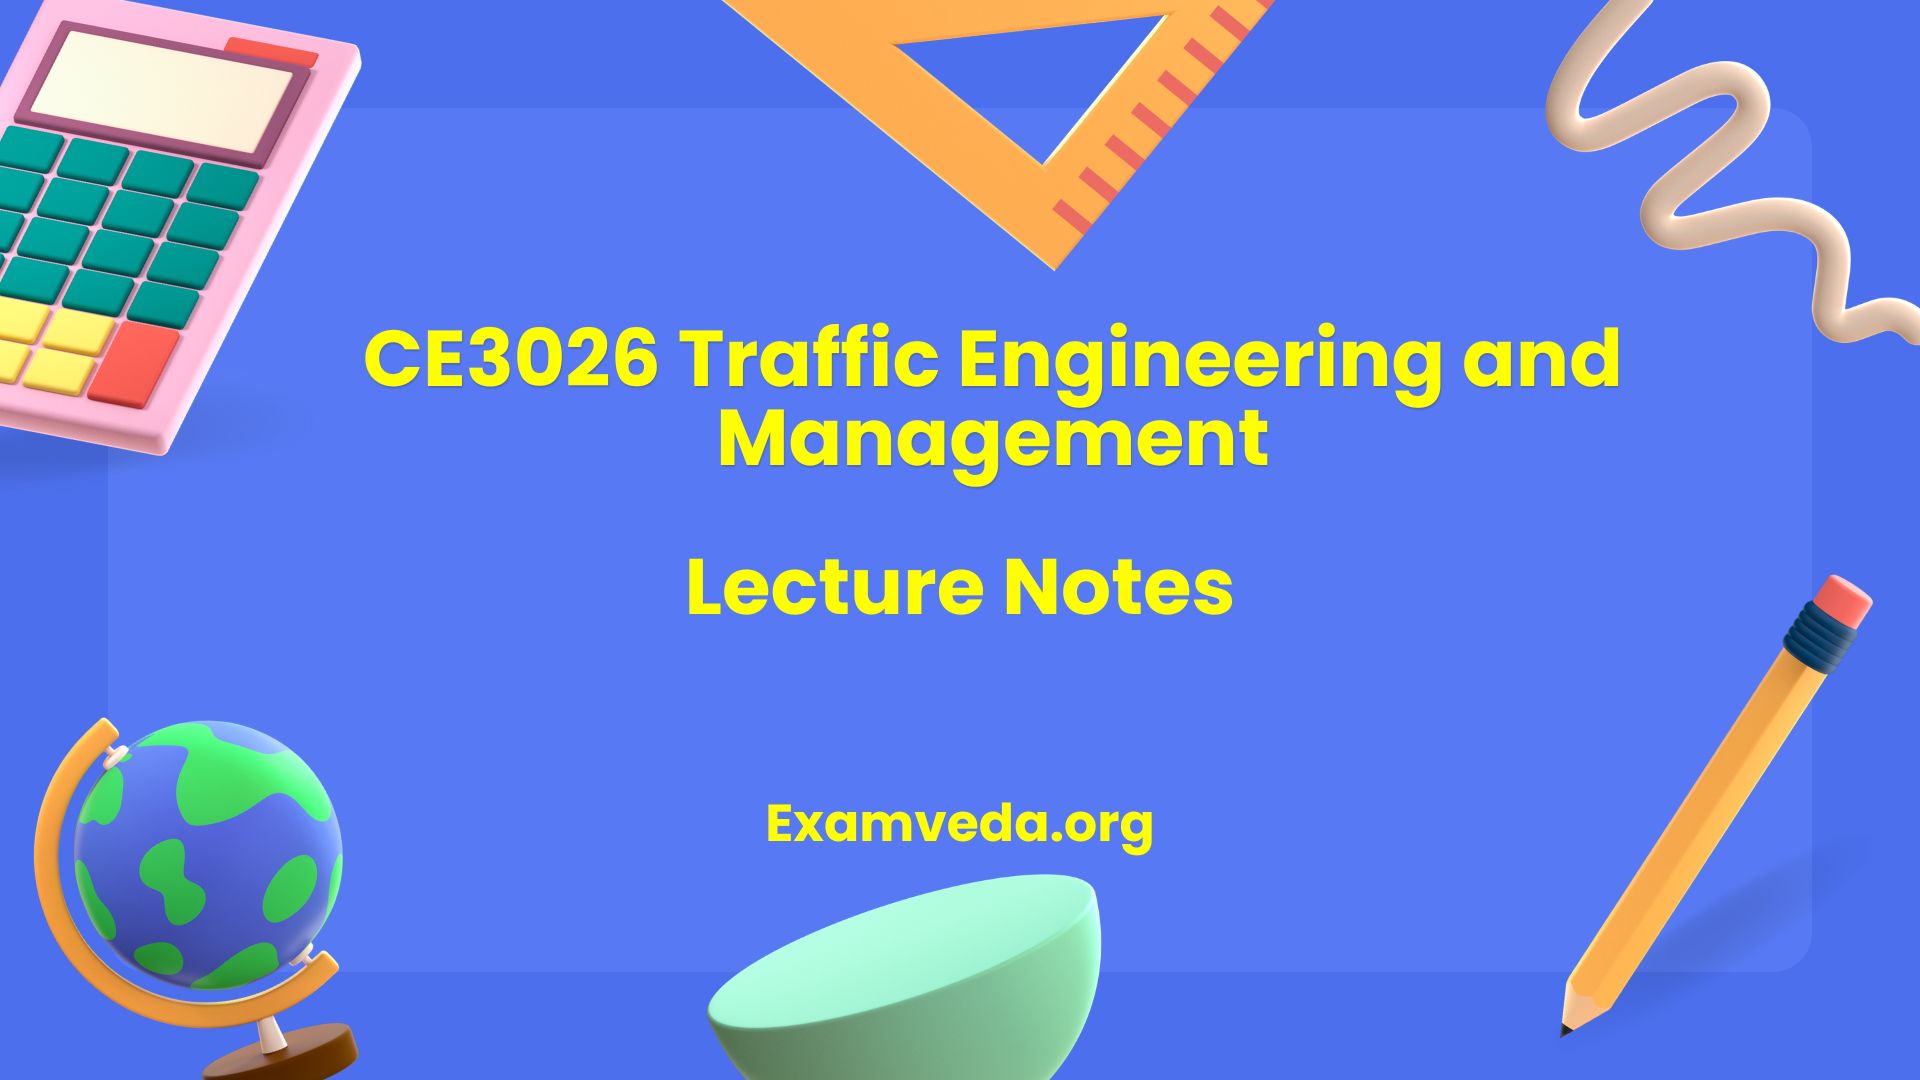 CE3026 Traffic Engineering and Management Lecture Notes